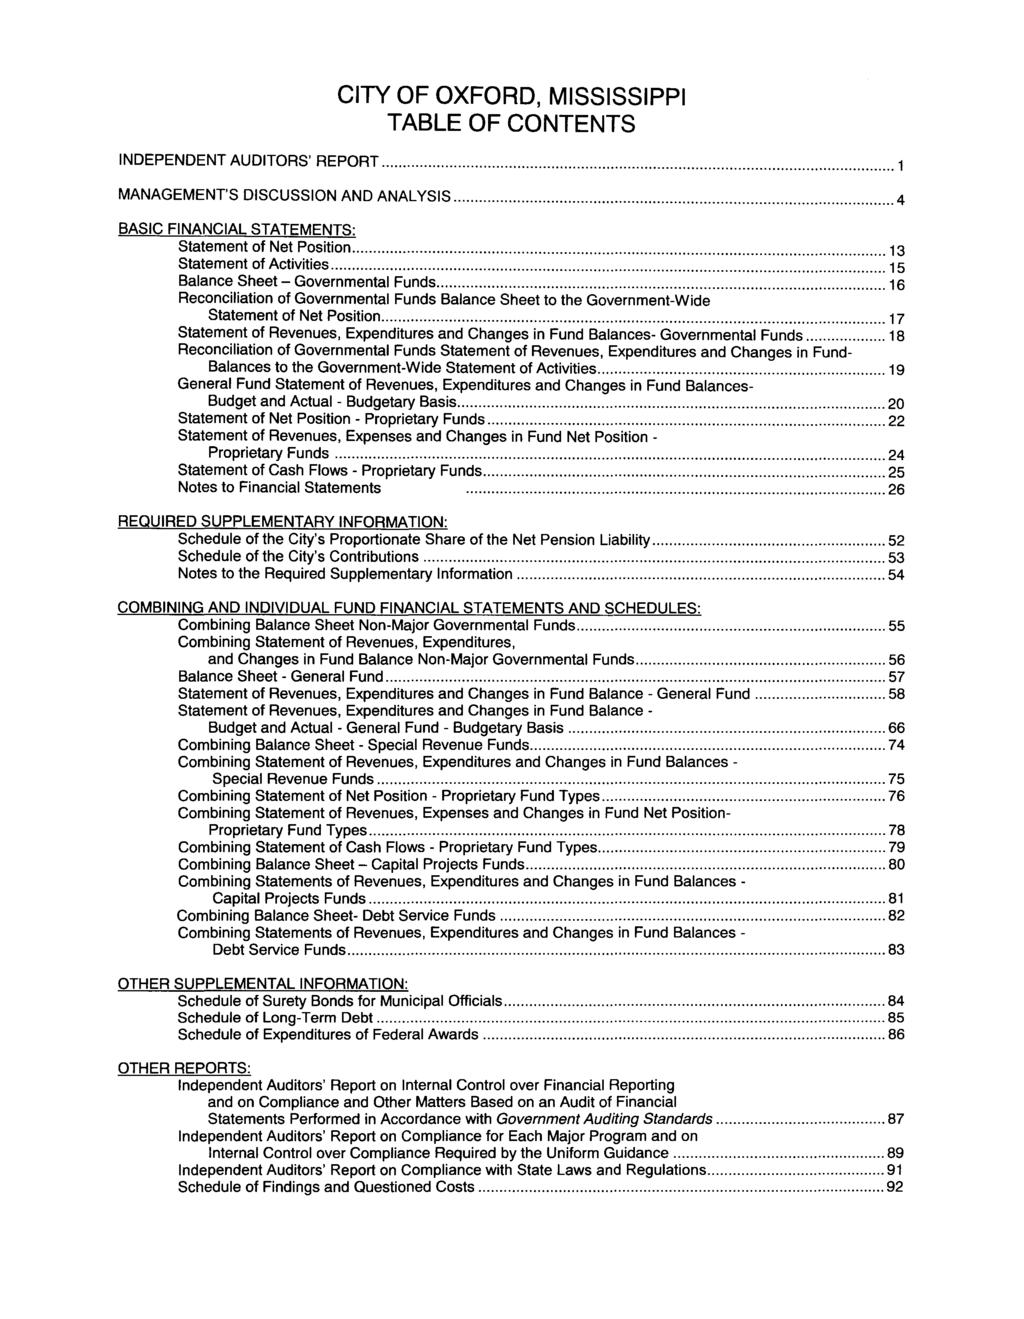 TABLE OF CONTENTS INDEPENDENT AUDITORS' REPORT... 1 MANAGEMENT'S DISCUSSION AND ANALYSIS... 4 BASIC FINANCIAL STATEMENTS: Statement of Net Position... 13 Statement of Activities.